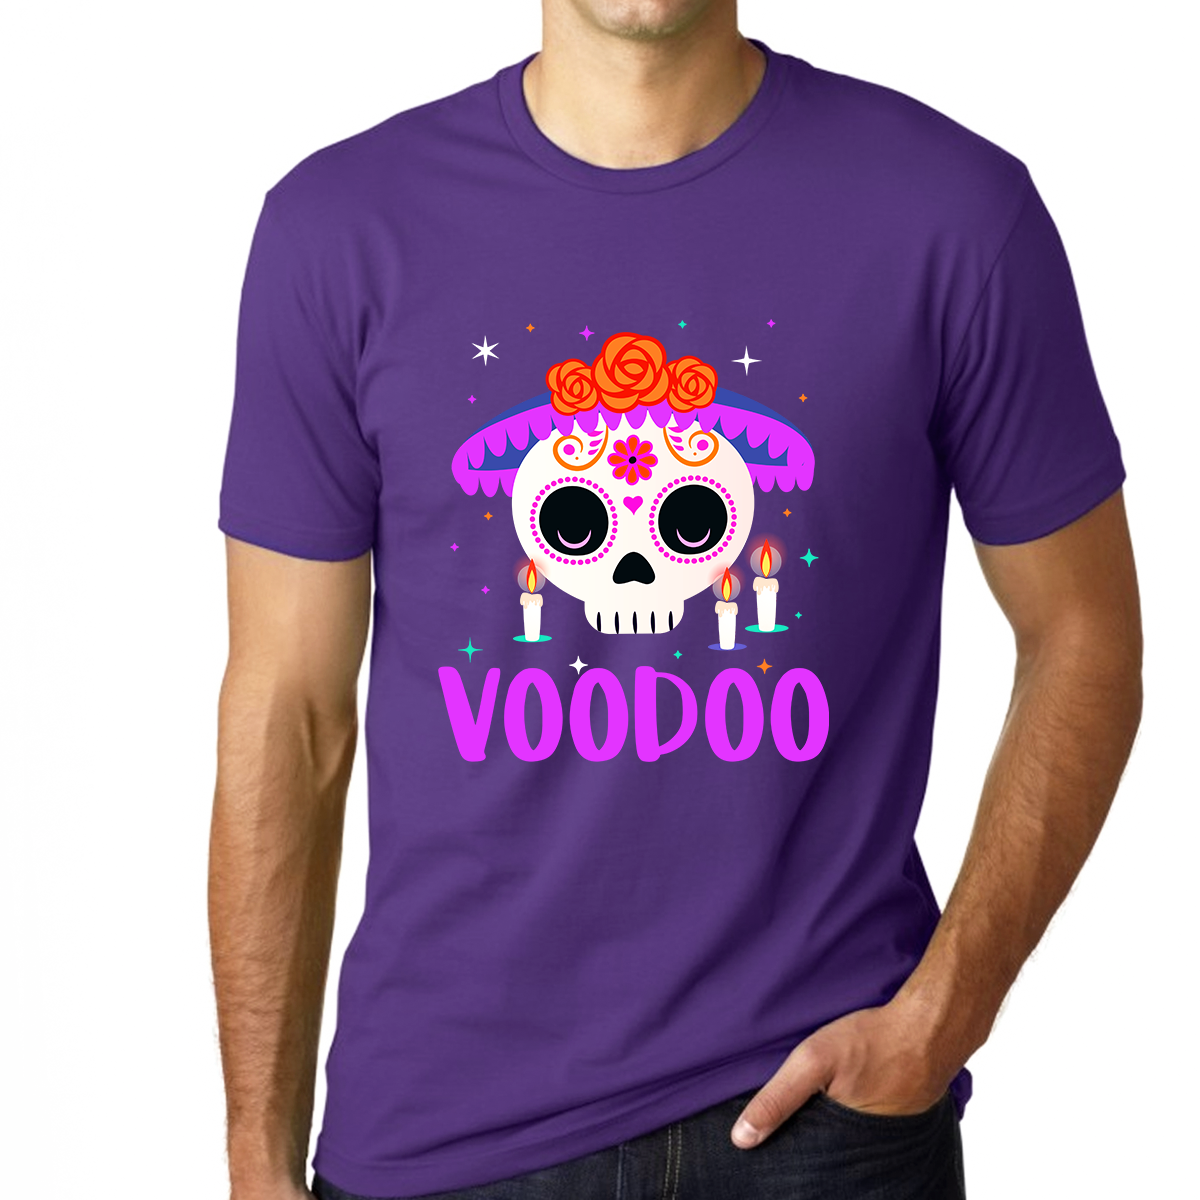 Mardi Gras Shirt for Men Day of The Dead Shirts Mardi Gras Outfit for Men Voodoo New Orleans Shirts